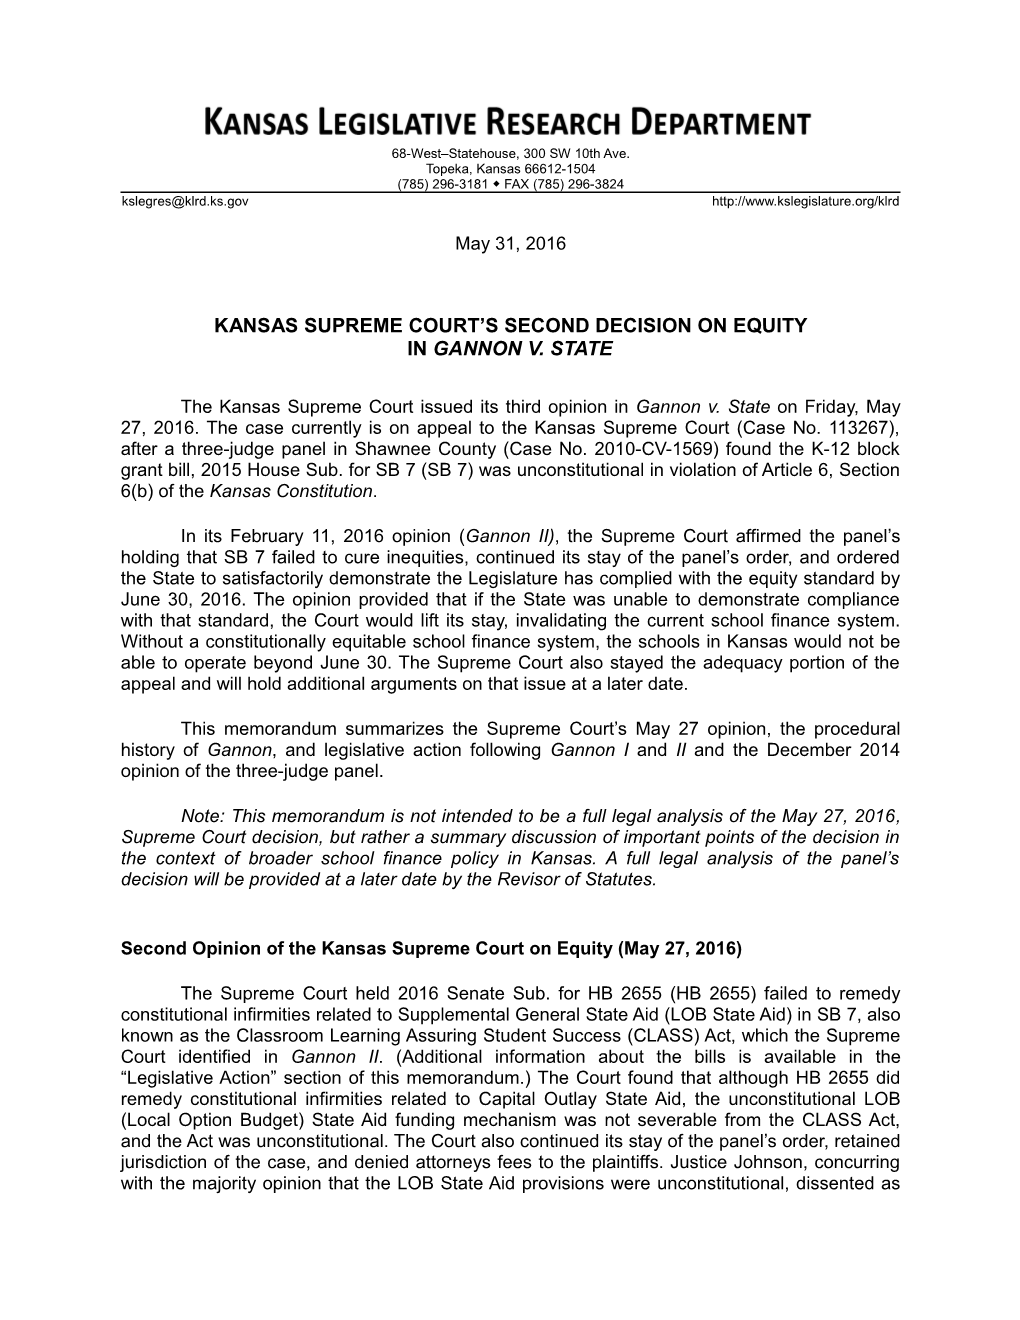 Kansas Supreme Court's Second Decision on Equity